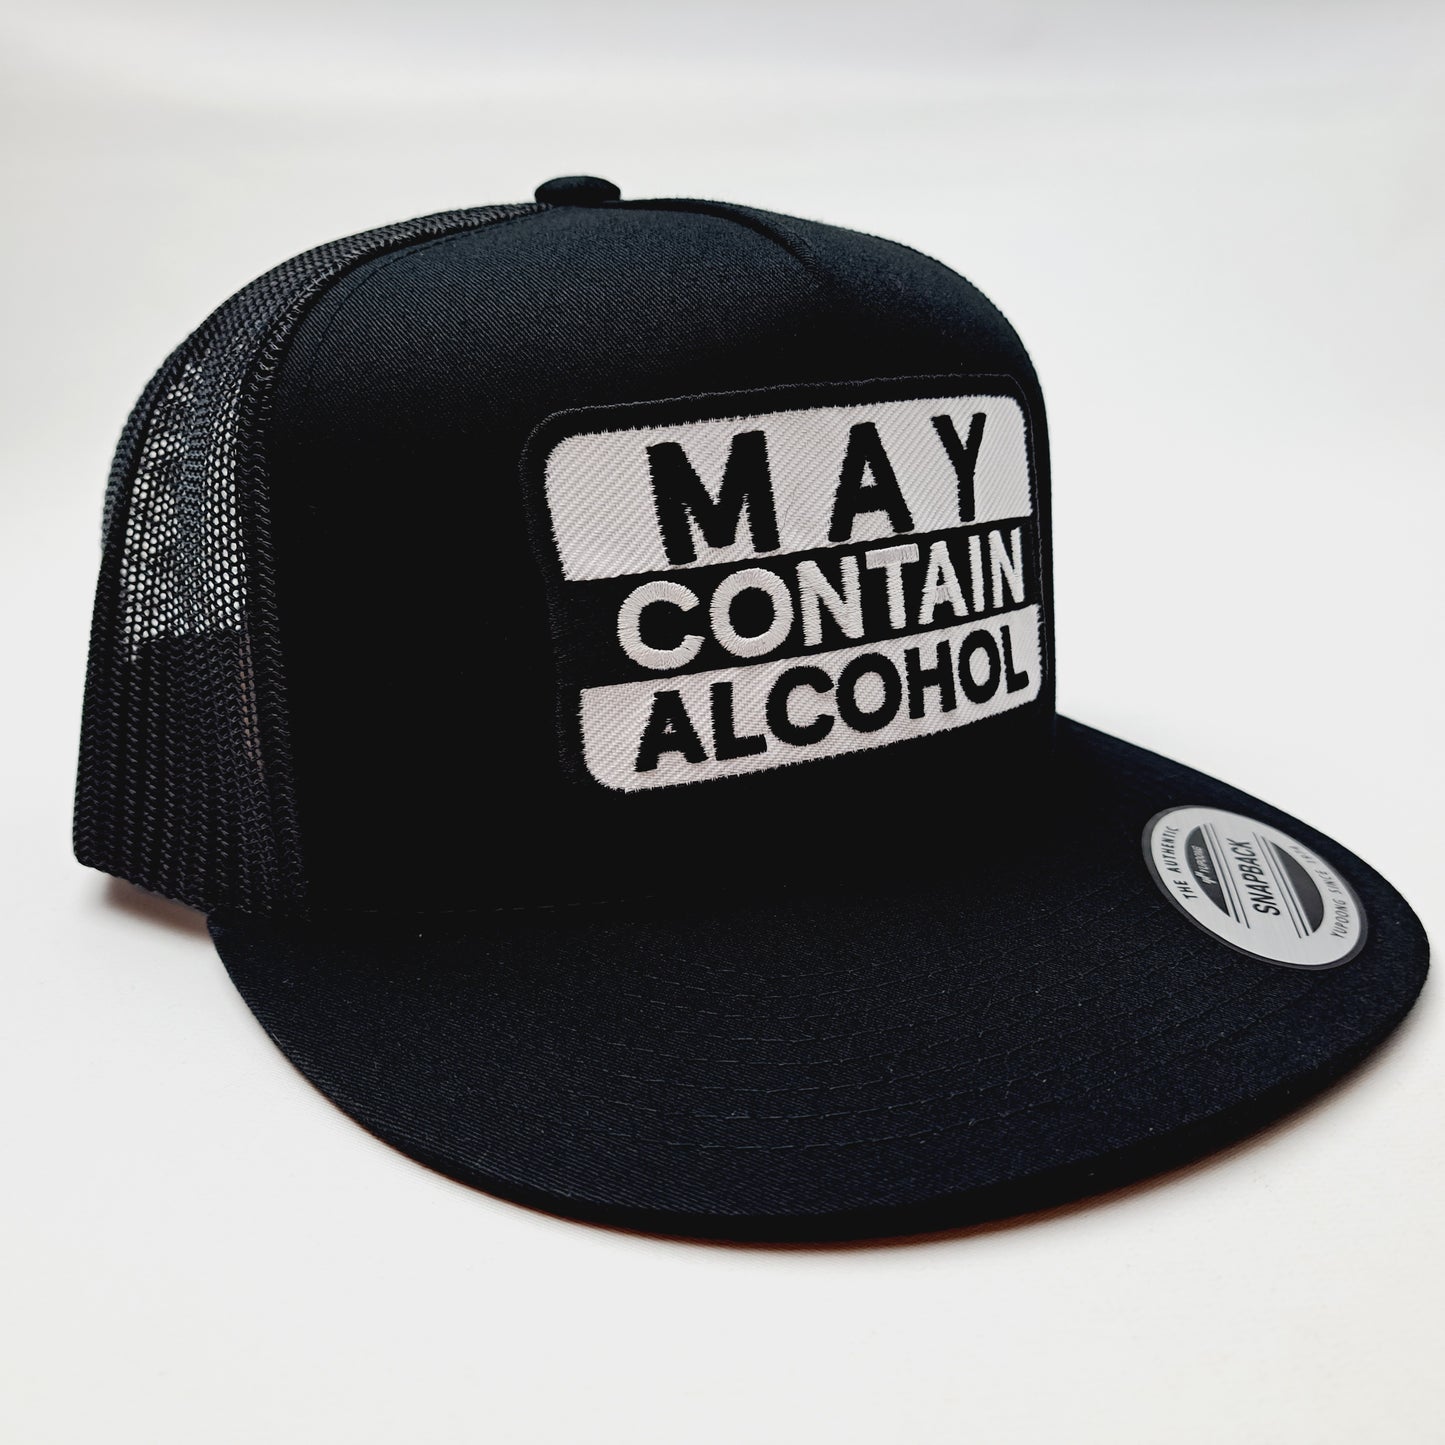 May Contain Alcohol Embroidered Patch Trucker Mesh Snapback Cap Hat Black